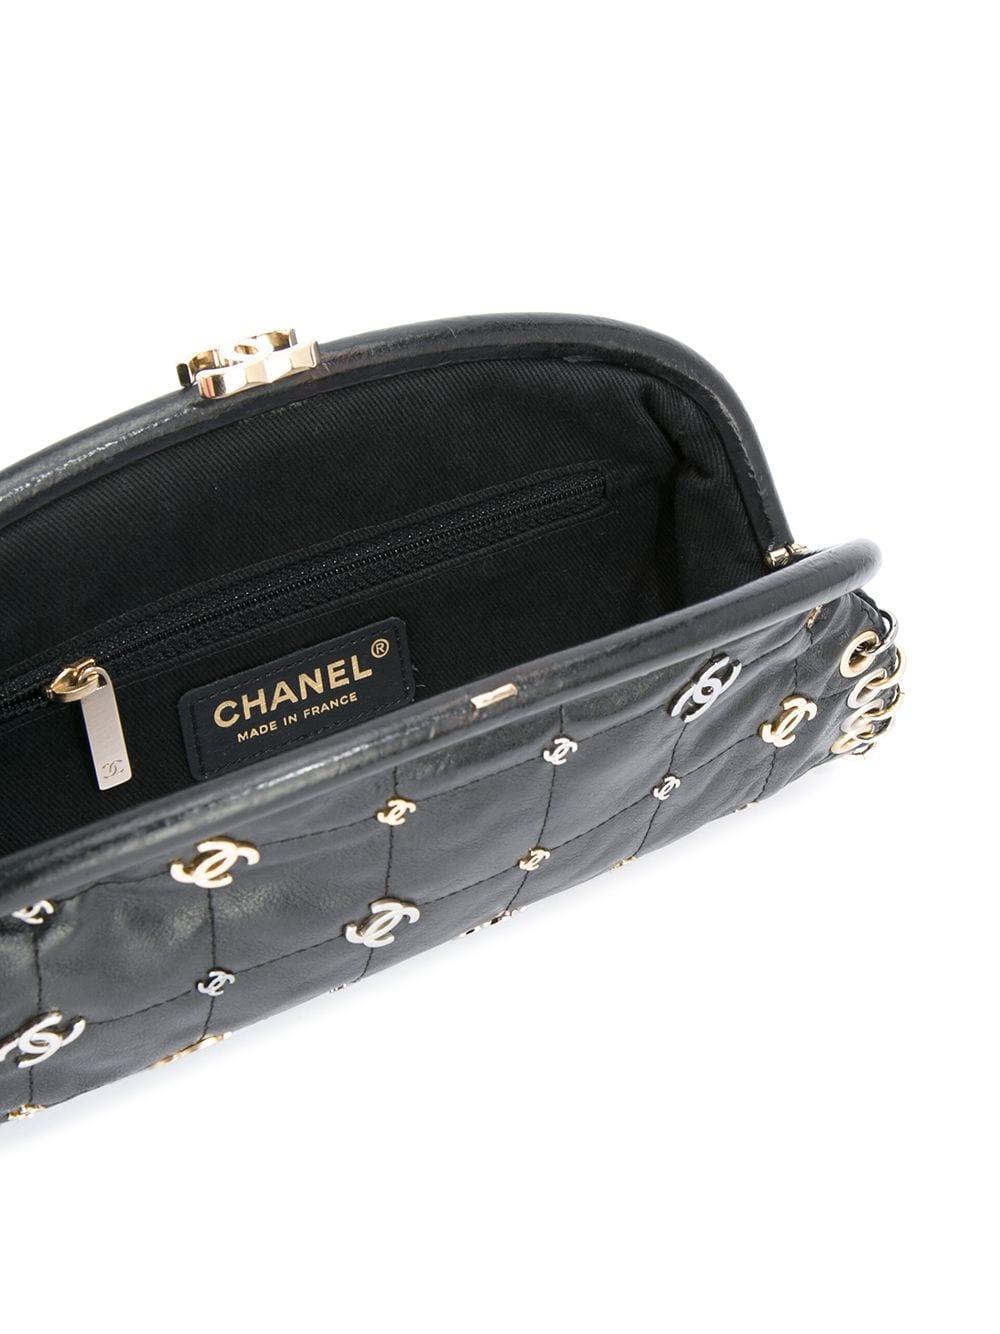 Chanel Spring 2007 Limited Edition Charm Rare Black Leather Clutch For Sale 7